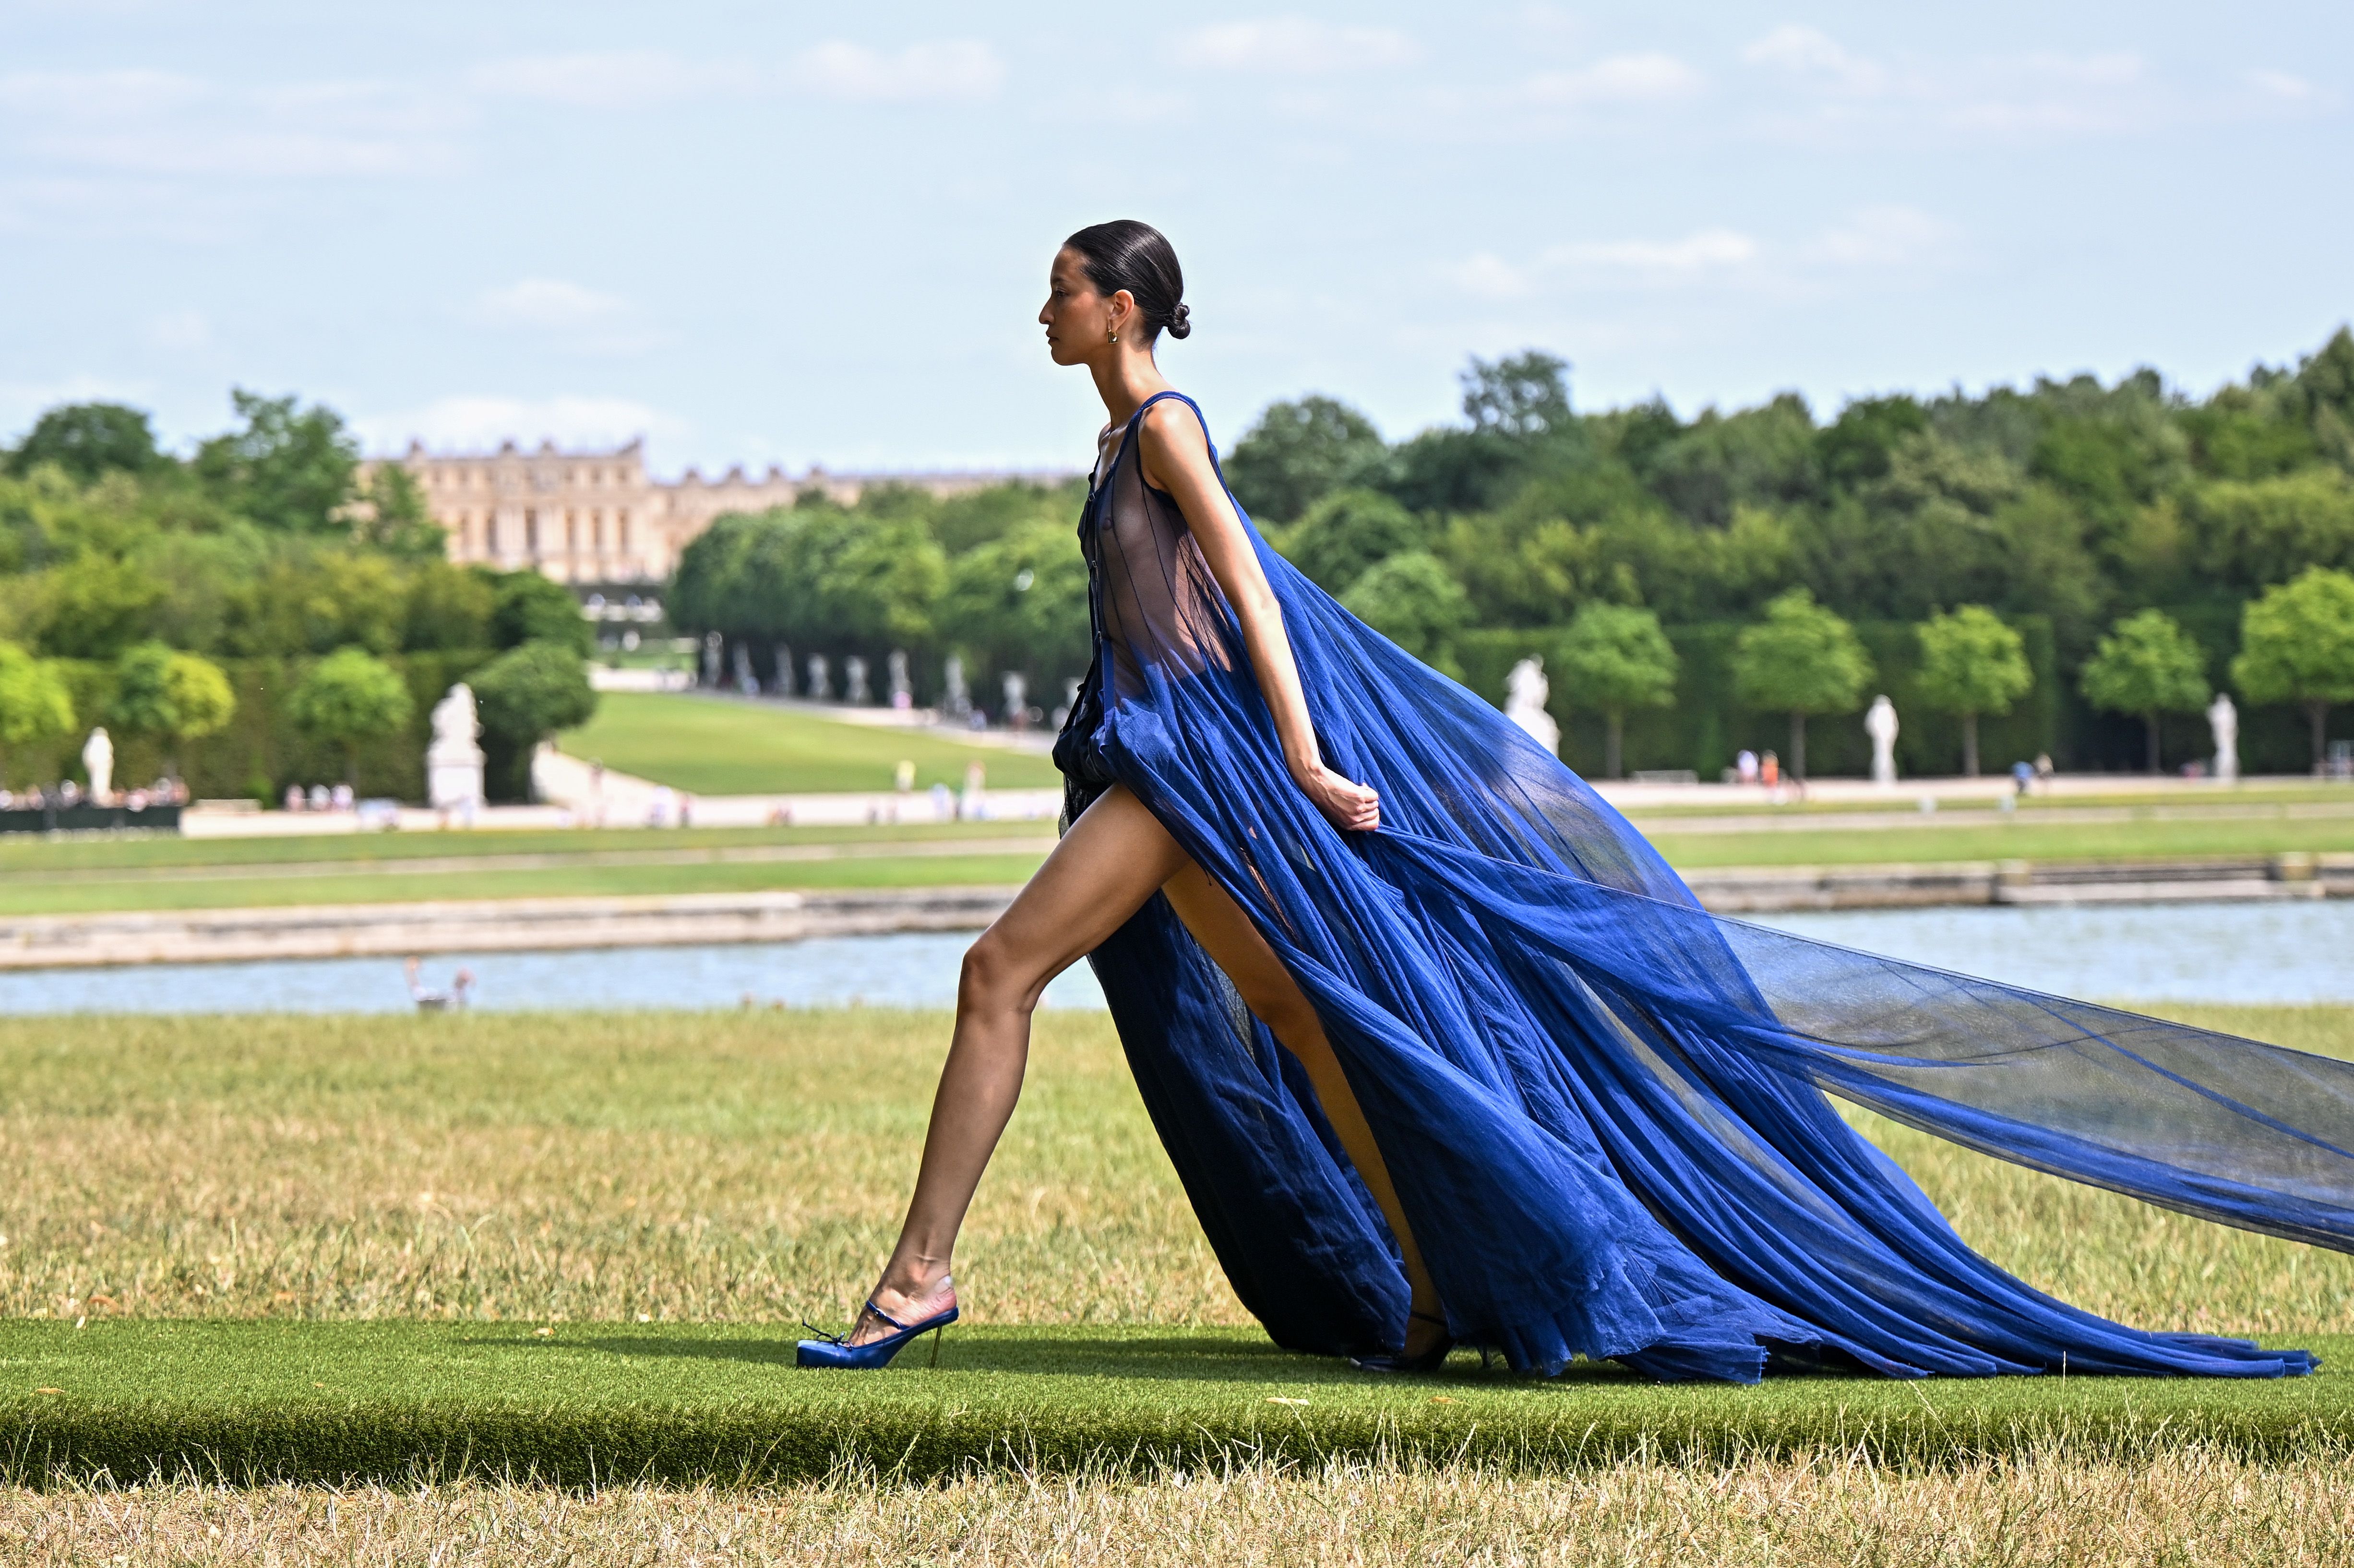 Jacquemus showcase at the Lake Versailles was a sight to behold